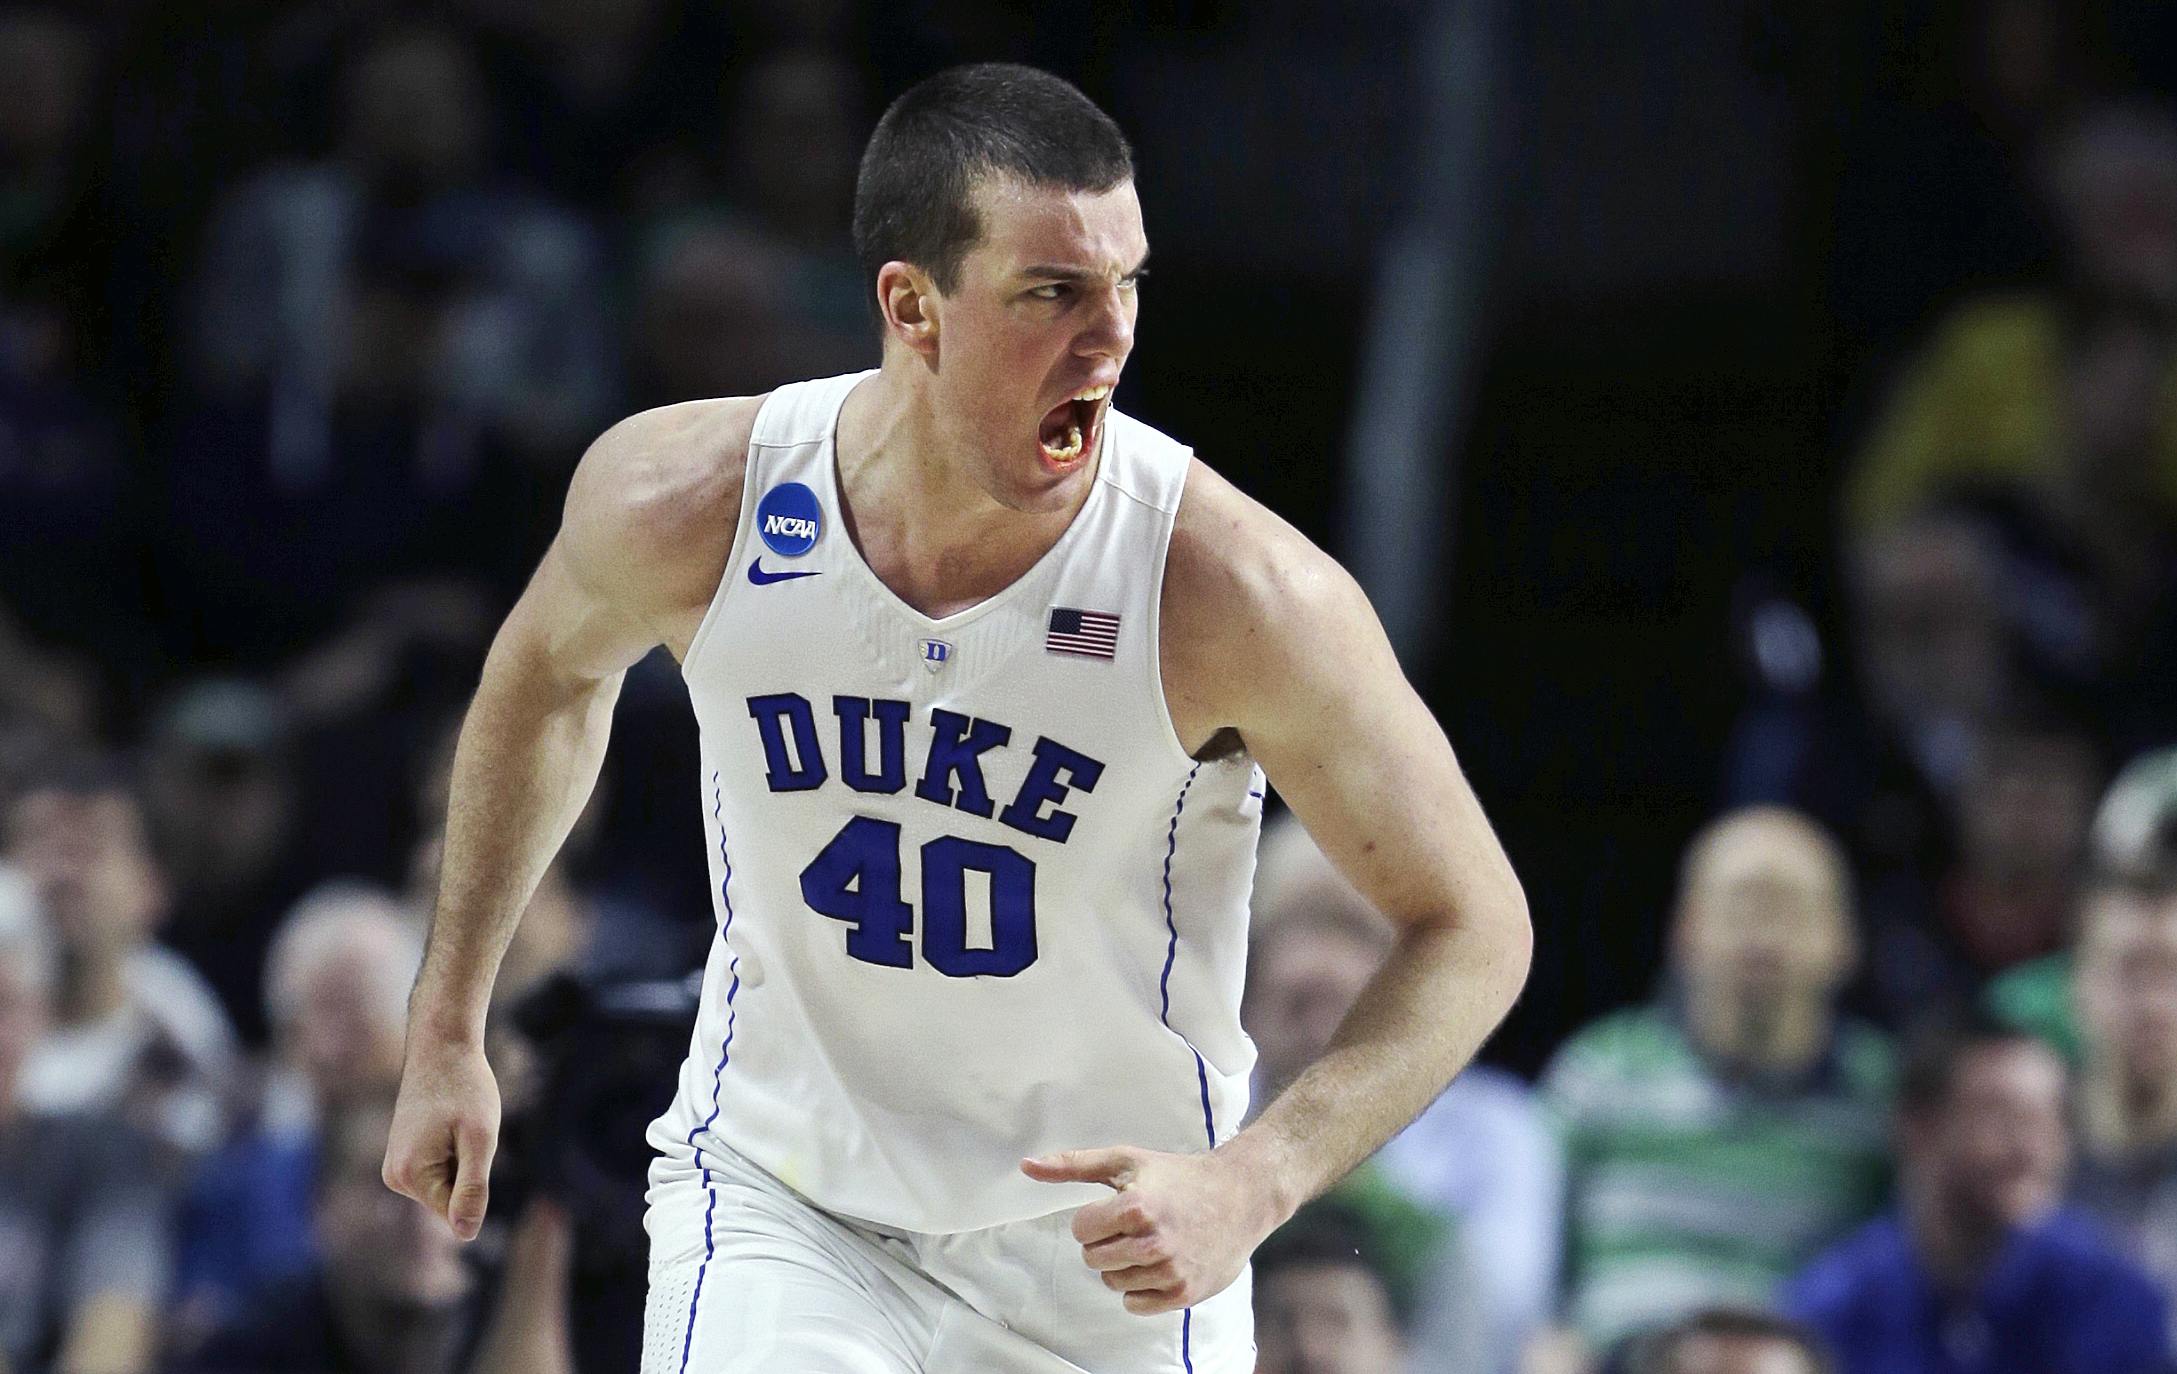 Duke center Marshall Plumlee (40) lets out a yell towards his bench as he heads up court after a basket against North Carolina-Wilmington in the second half during the first round of the NCAA college men's basketball tournament in Providence, R.I., Thursday, March 17, 2016. Plumlee had 23 points as Duke defeated North Carolina-Wilmington 93-85. (AP Photo/Charles Krupa)